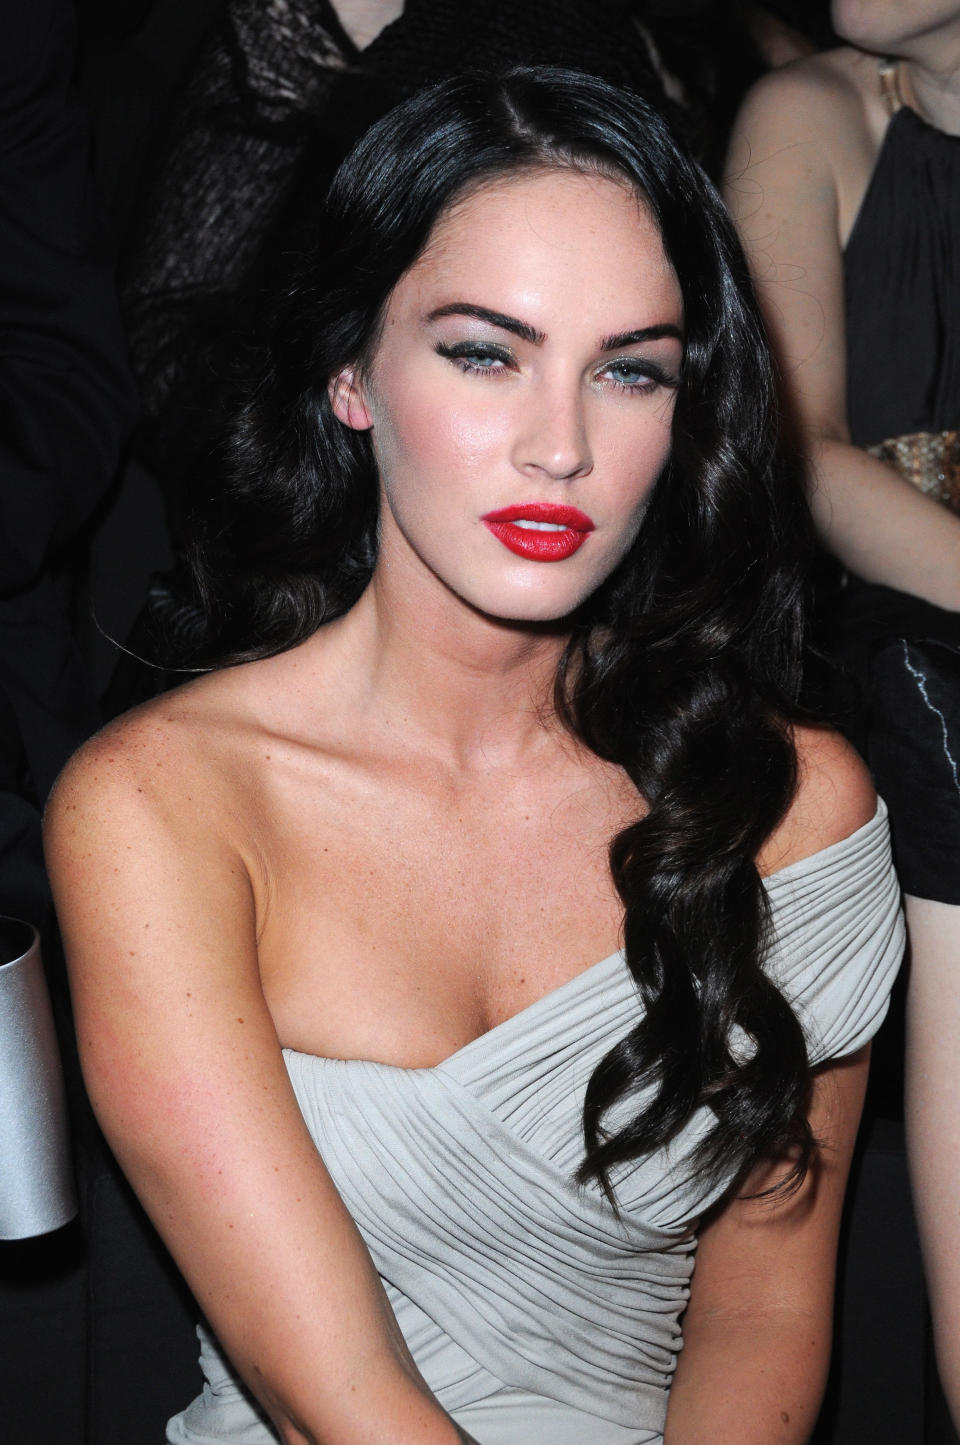 PARIS - JULY 07:  Actress Megan Fox attends Giorgio Armani Prive Fashion Show at Palais de Chaillot on July 7, 2009 in Paris, France.  (Photo by Pascal Le Segretain/Getty Images)